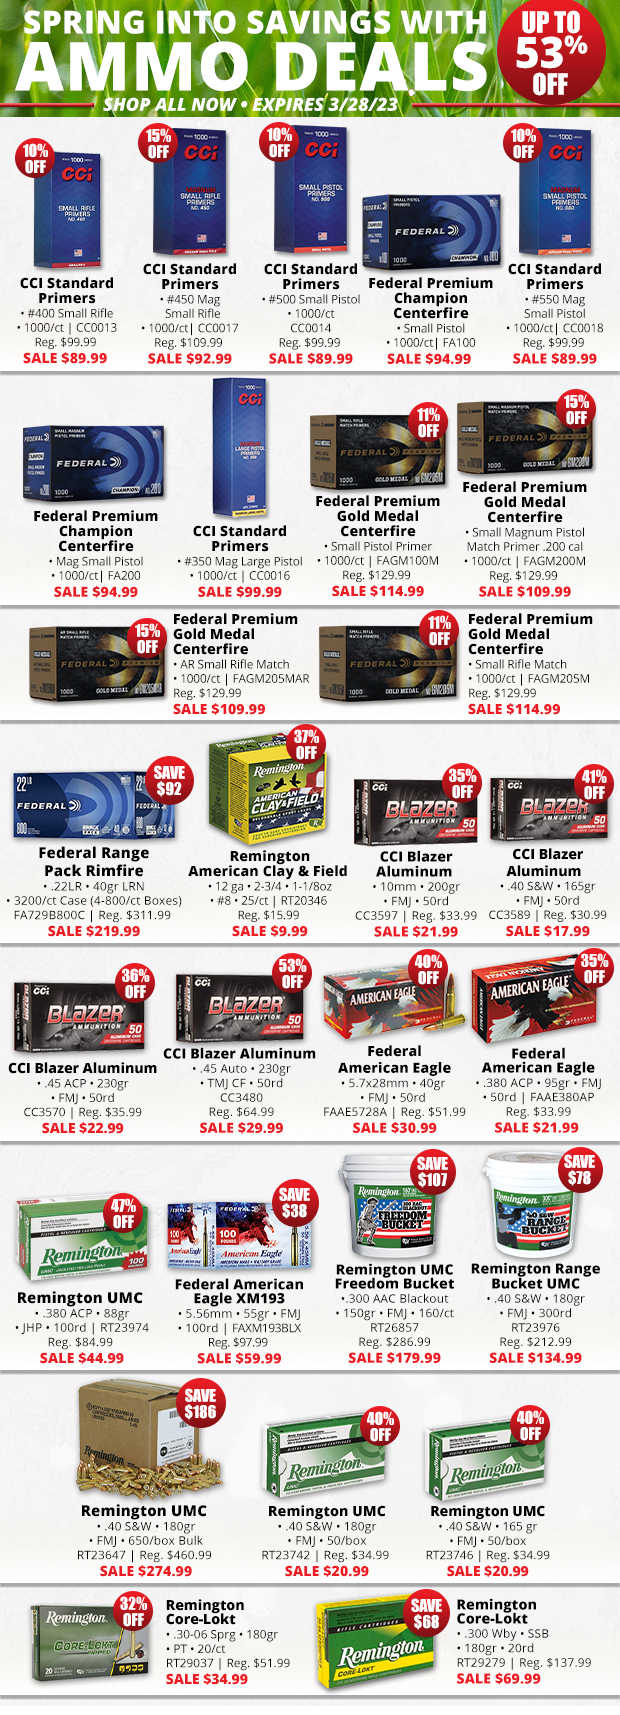 Spring Into Savings with Ammo Deals up to 53% Off